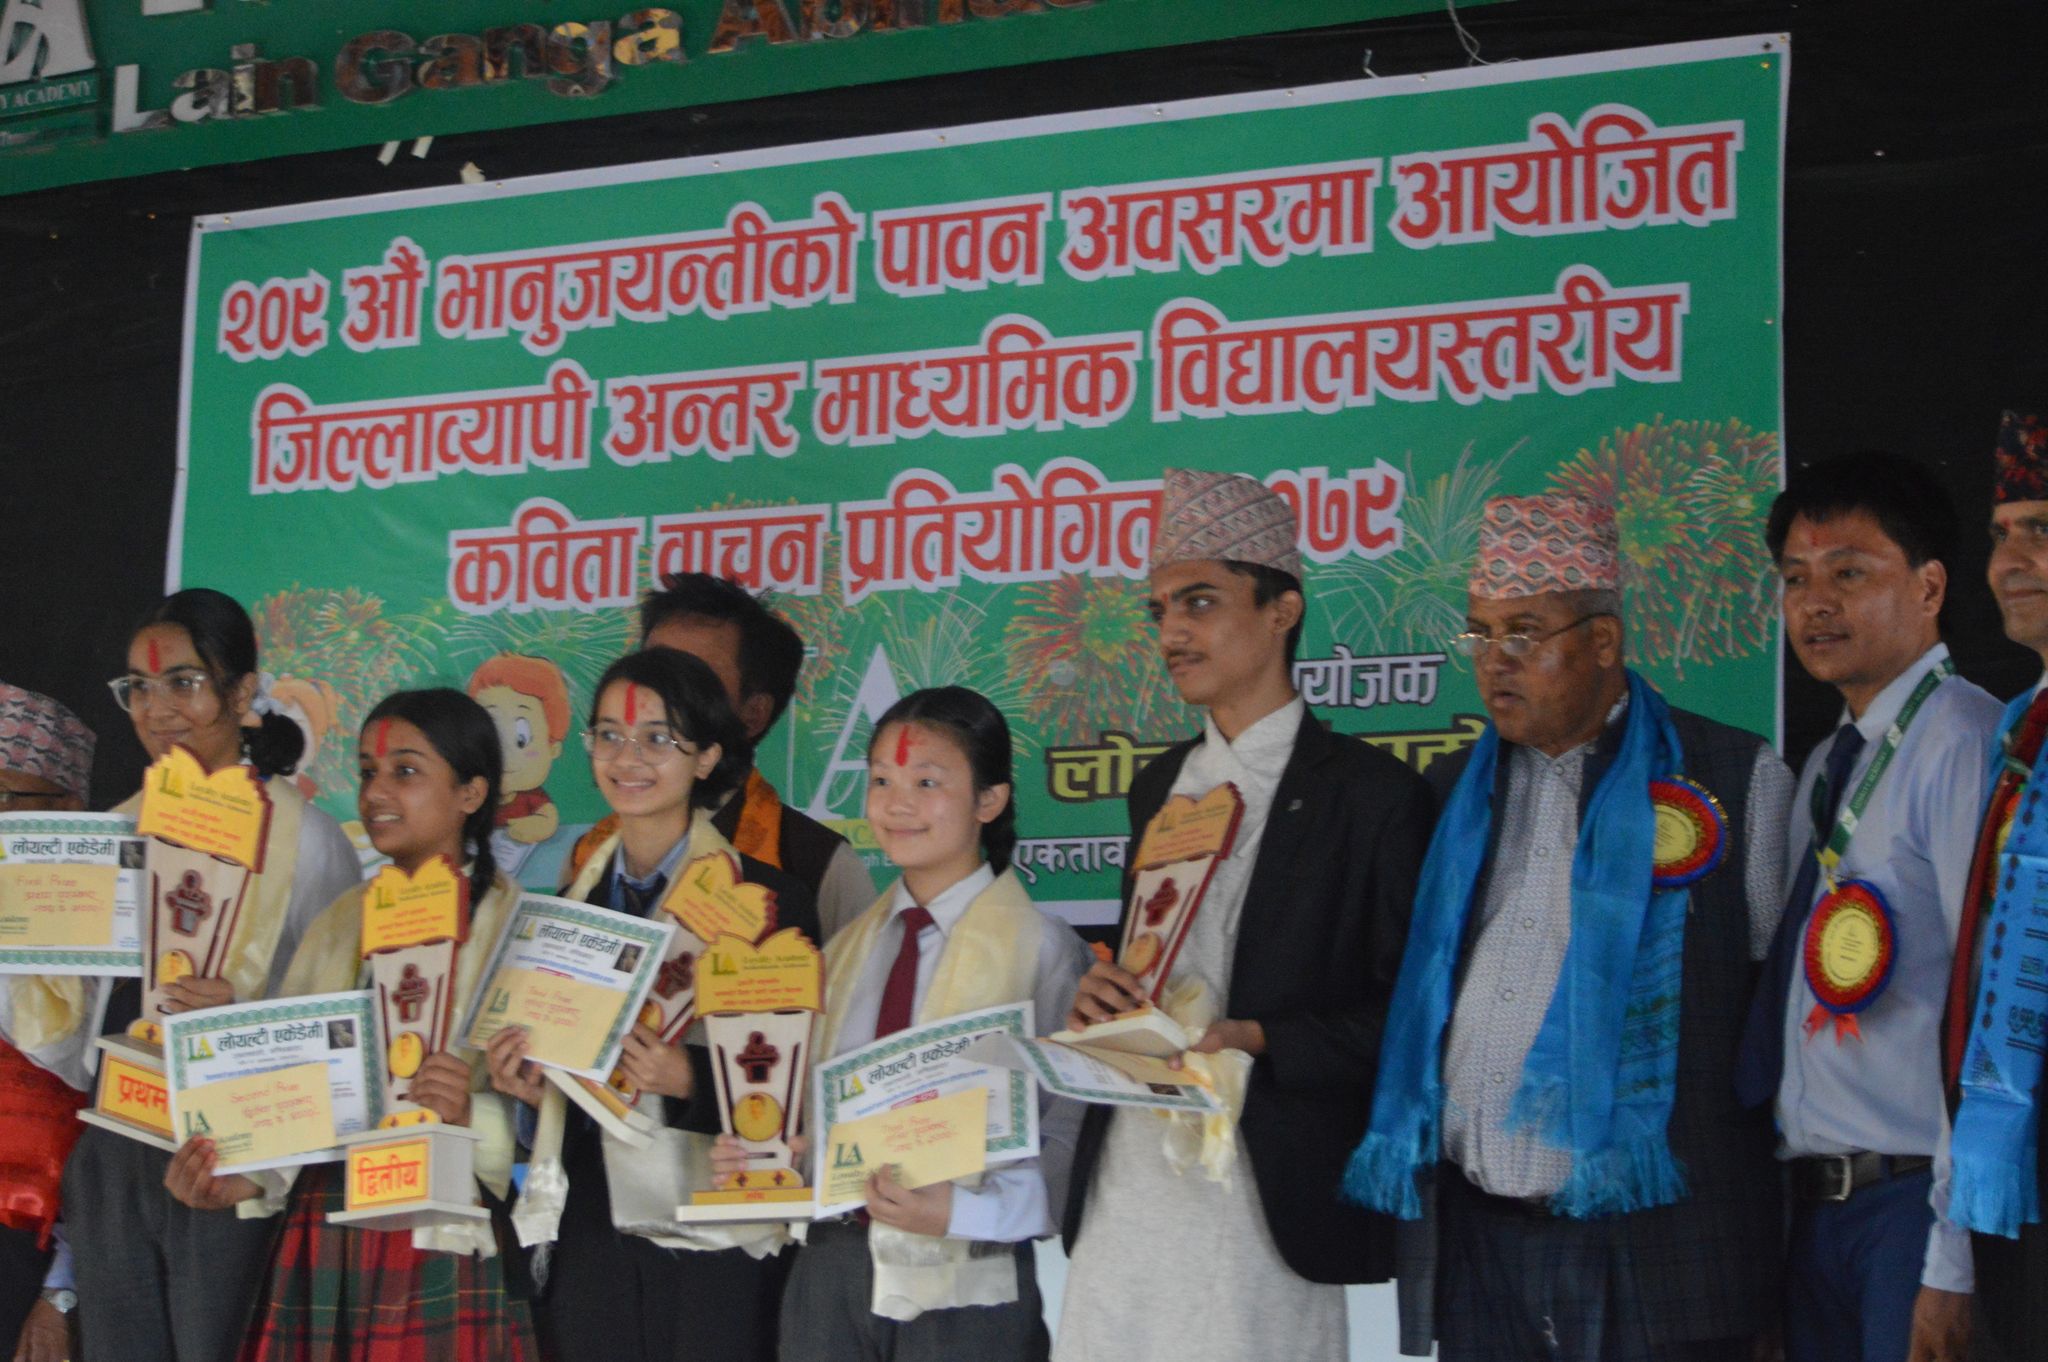 Loyalty Academy holds poetry recitation contest